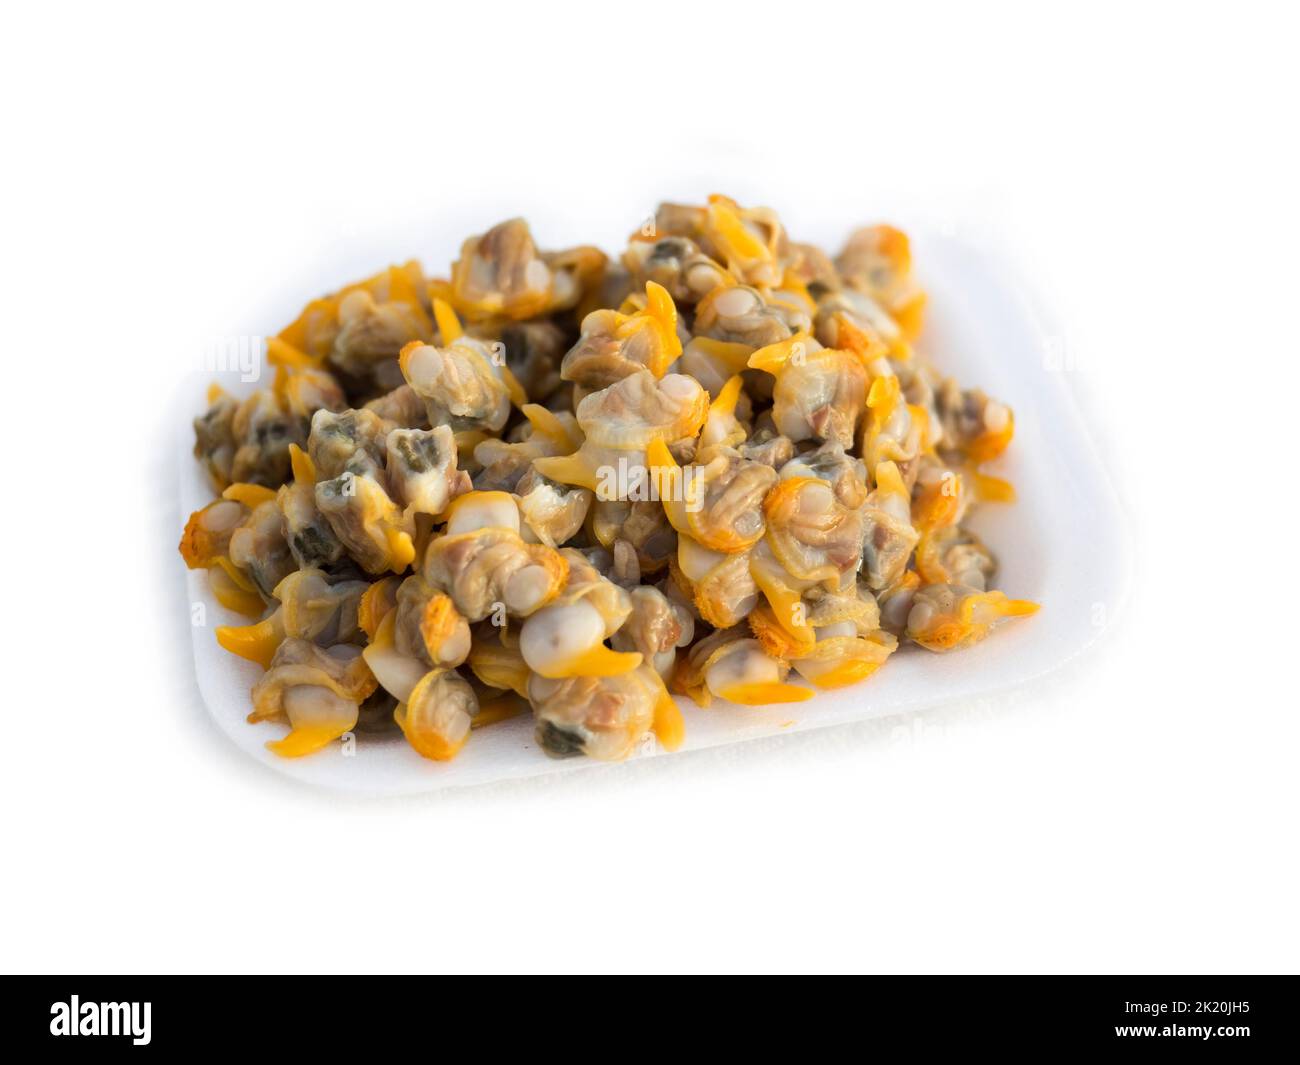 A takeaway plate of Cockles from a seafood stall isolated on a white background Stock Photo